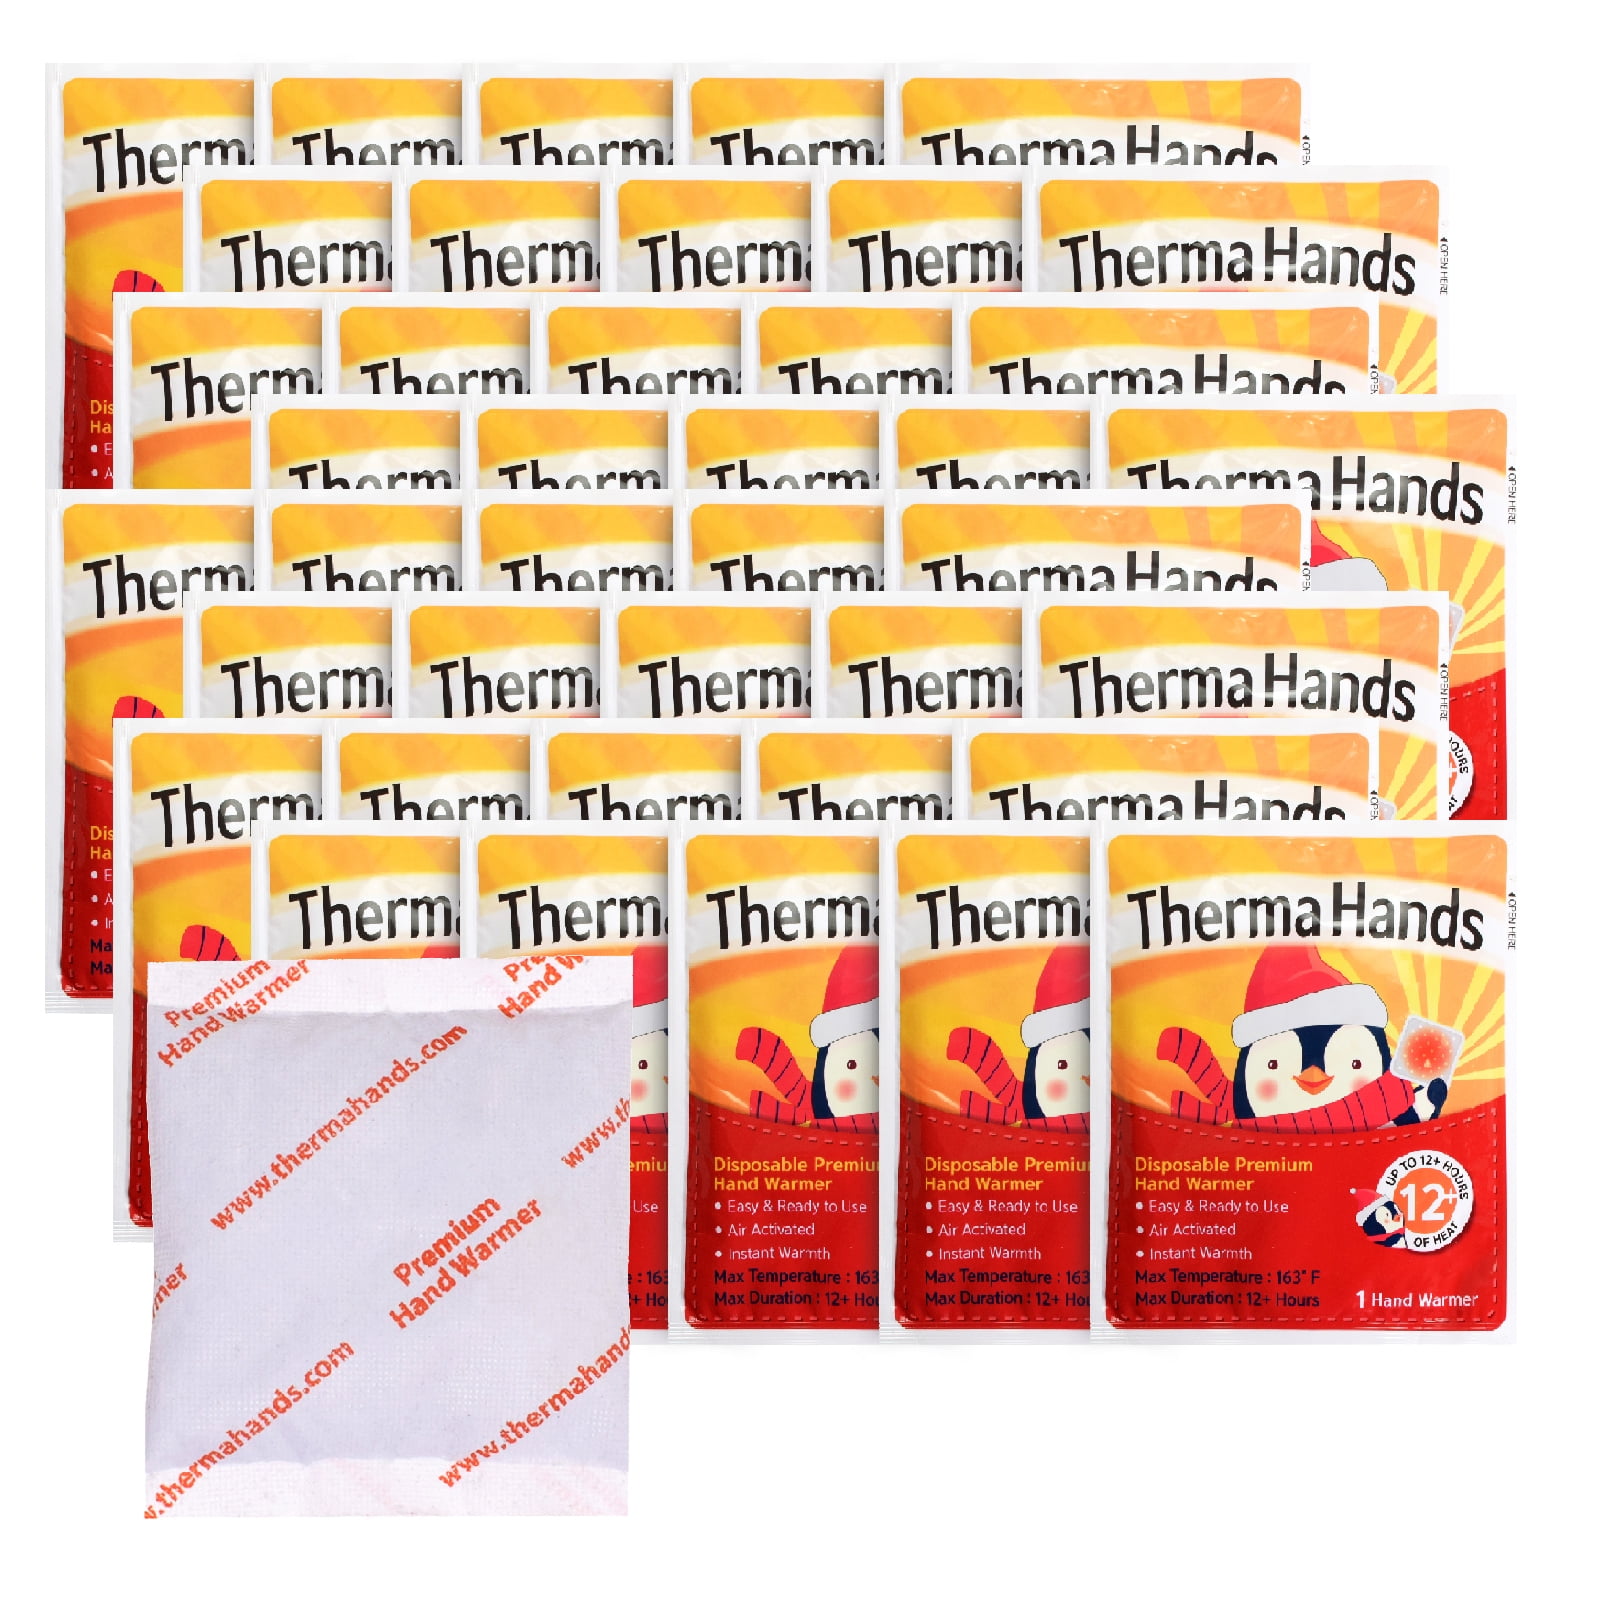 Convenient 15 Packs Odorless, Size: 3.5 inch x 4 inch, Duration: 12 Hours, Max Temp: 163 F Natural Safe - Premium Quality Air-Activated ThermaHands Hand Warmers